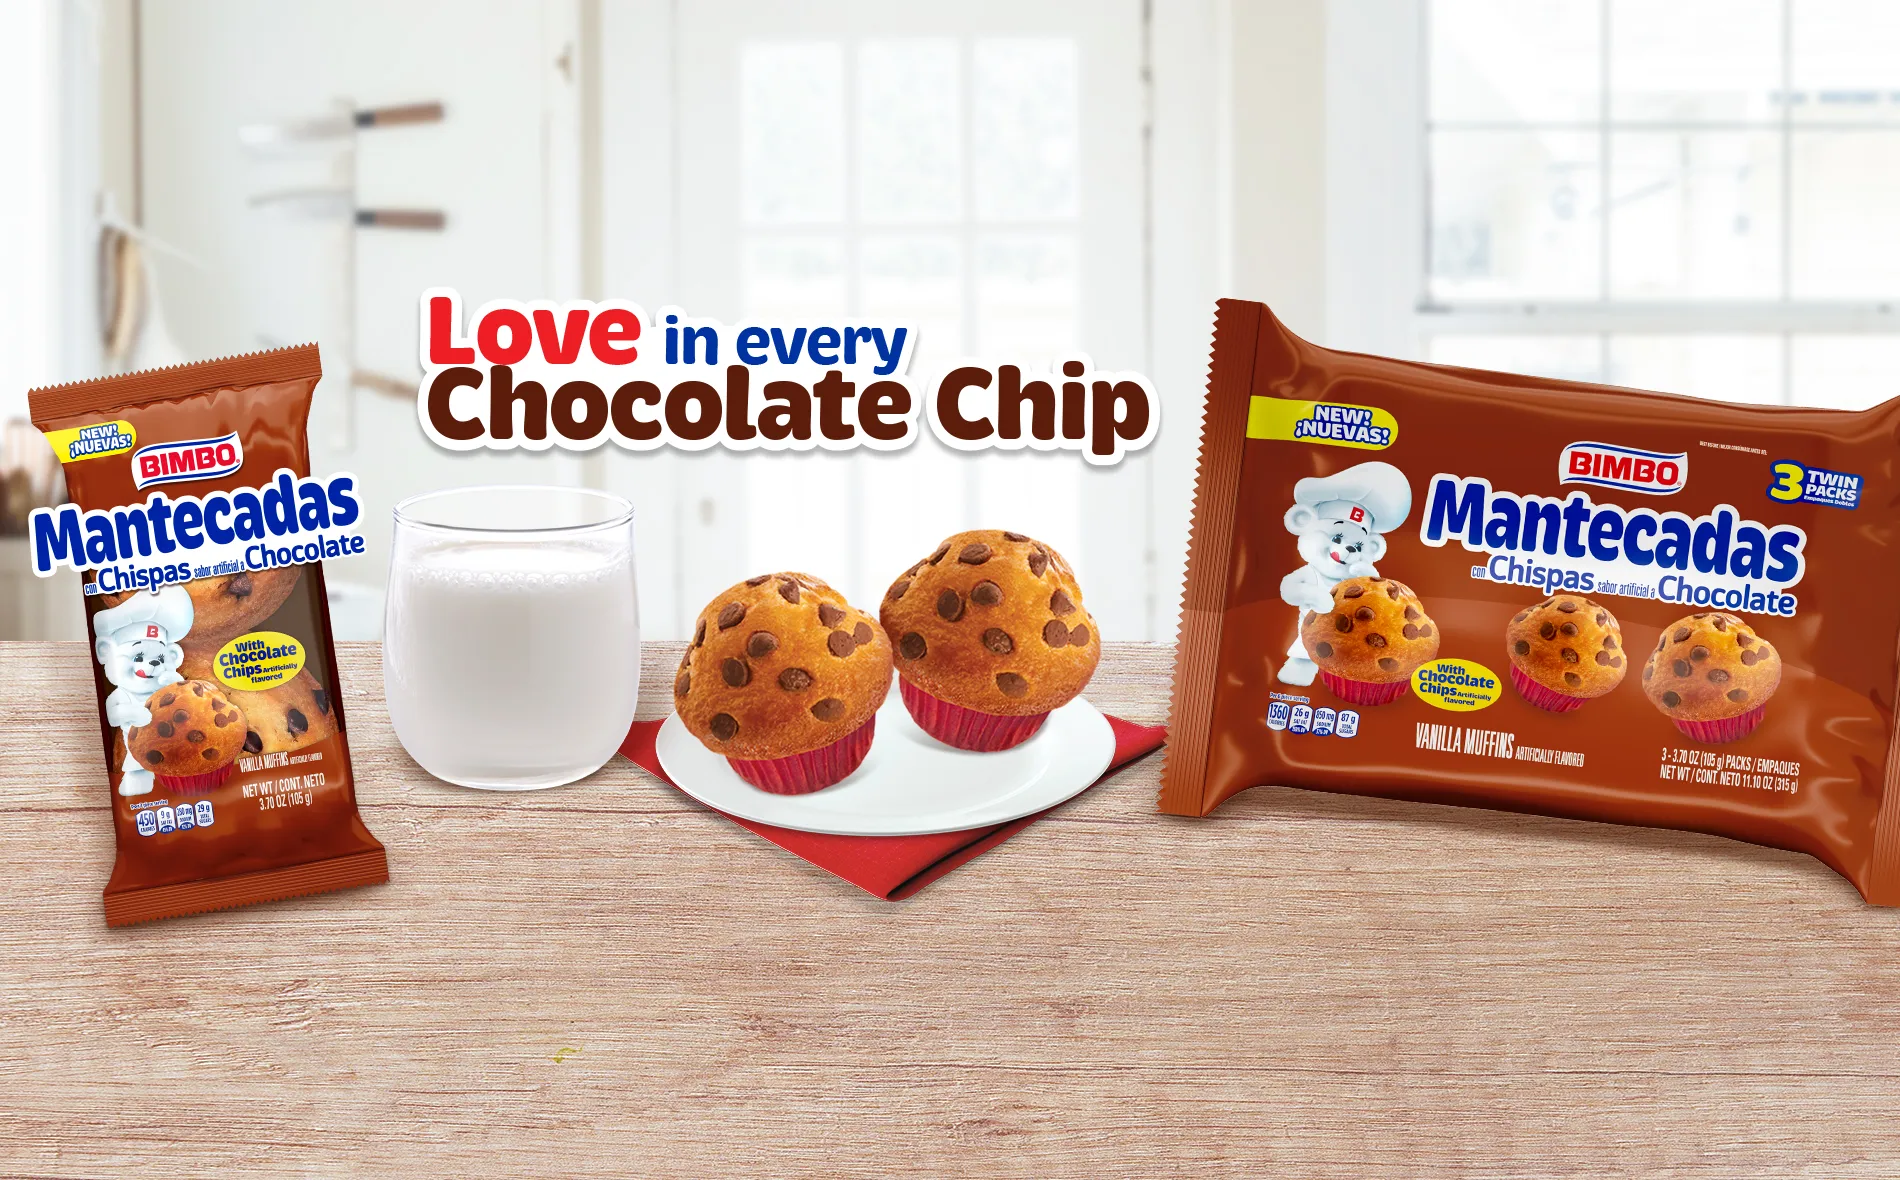 Love in every Chocolate Chip